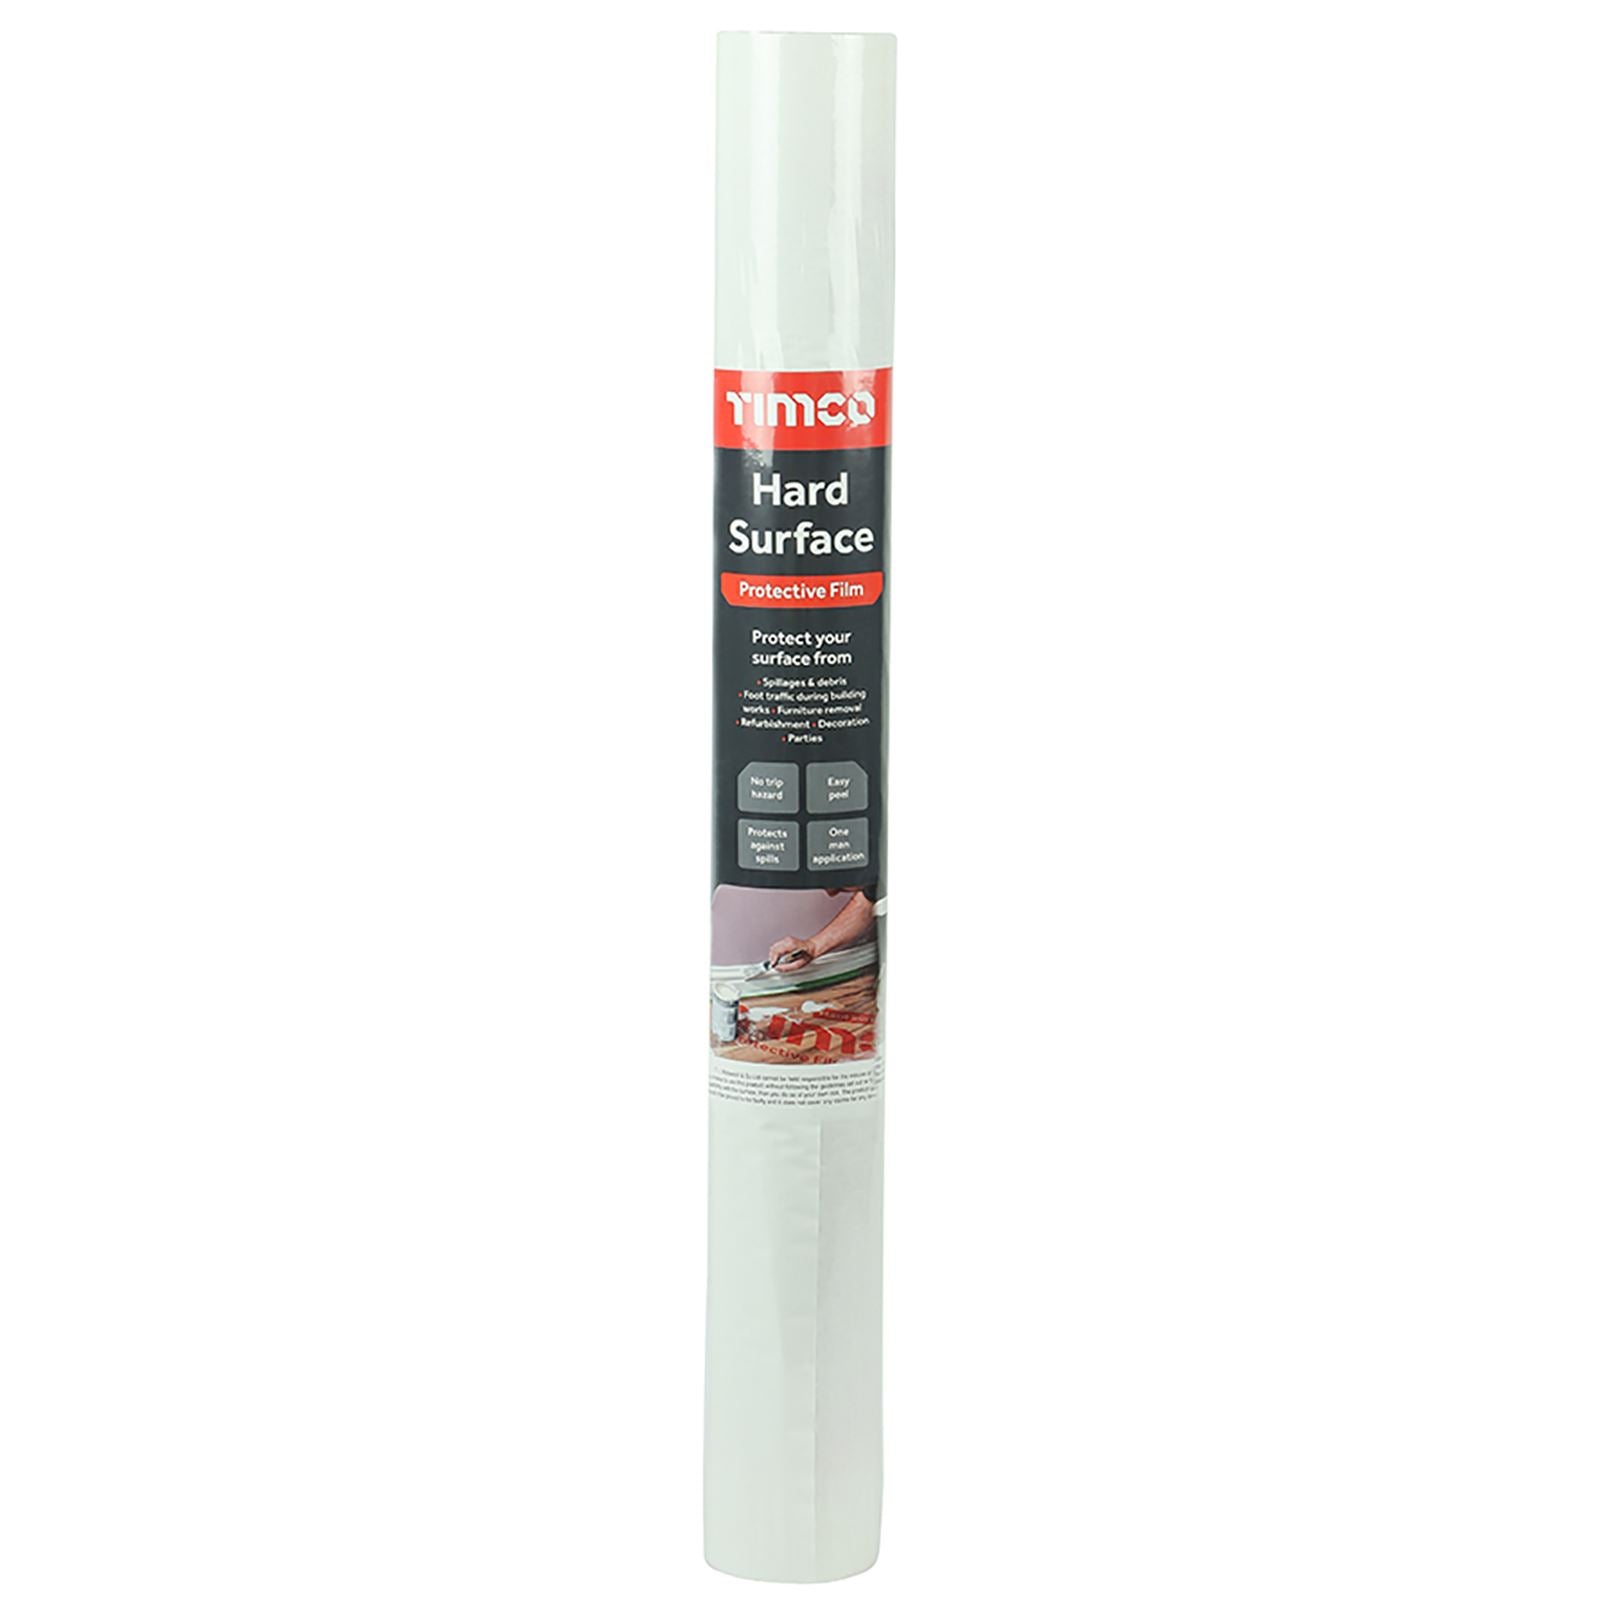 TIMCO Hard Surface Protective Film 25m x 600mm Roll